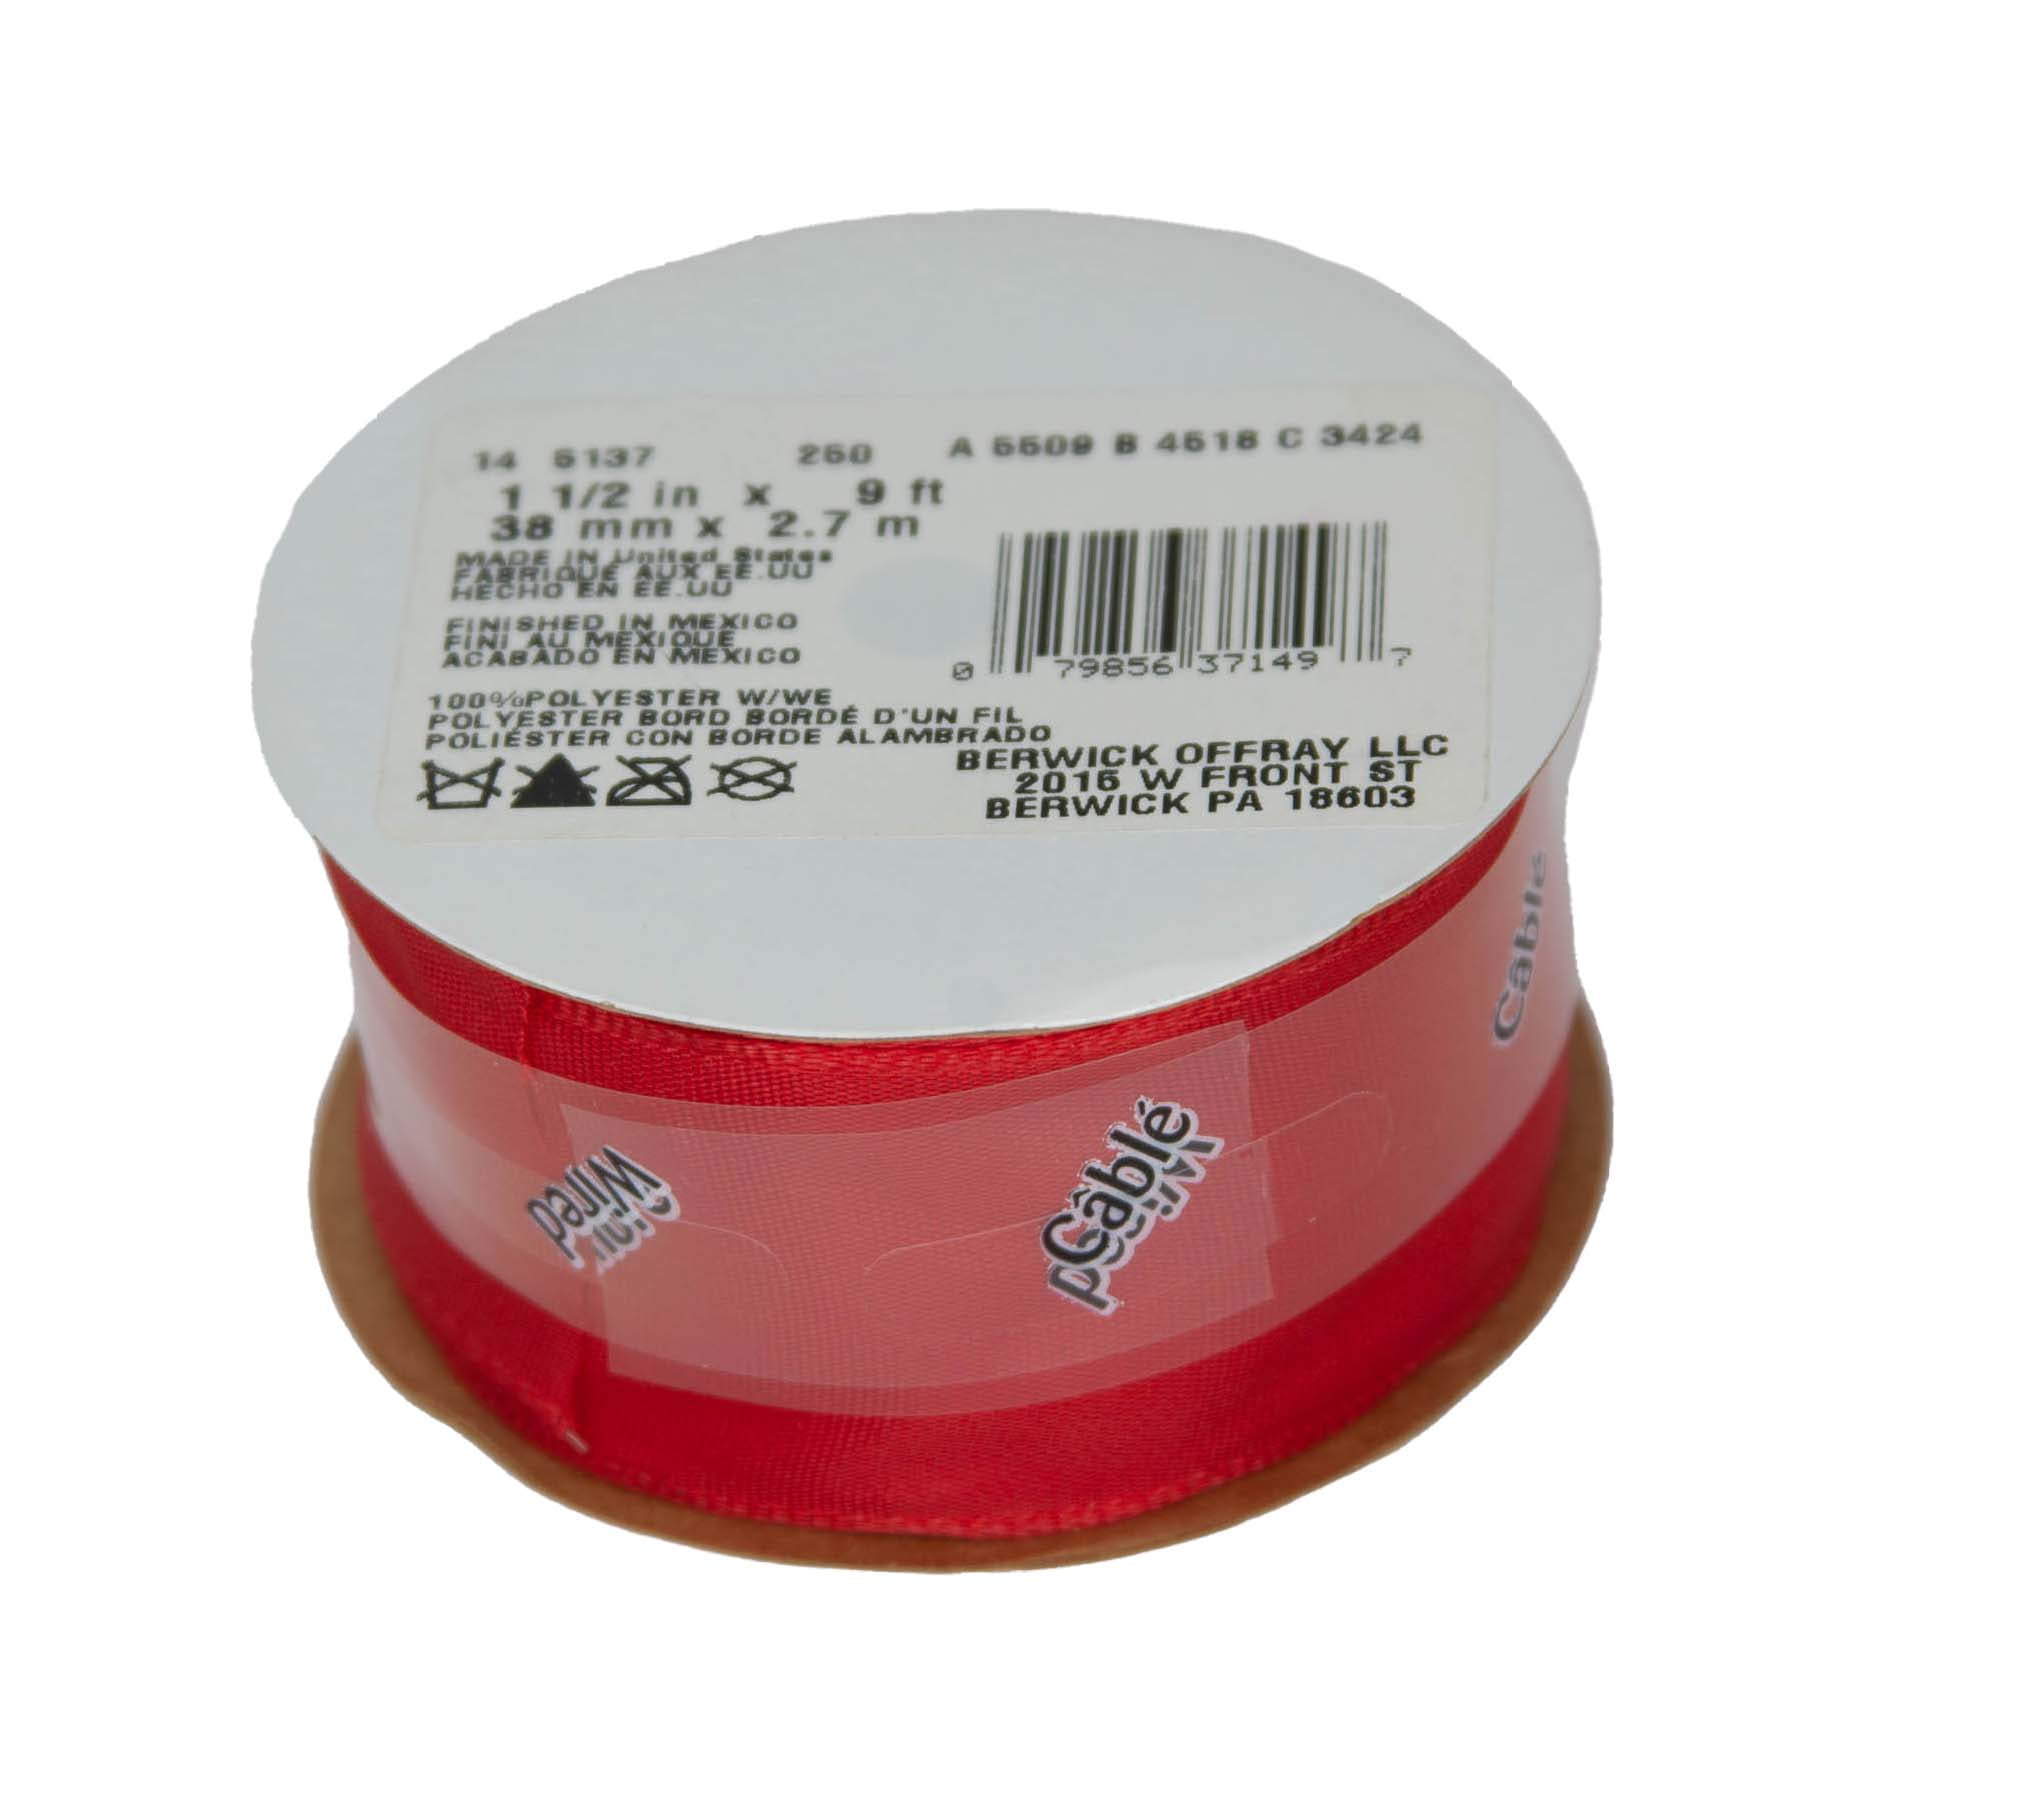  Offray Wired Edge Encore Sheer Craft Ribbon, 1-1/2-Inch Wide by  25-Yard Spool, Red